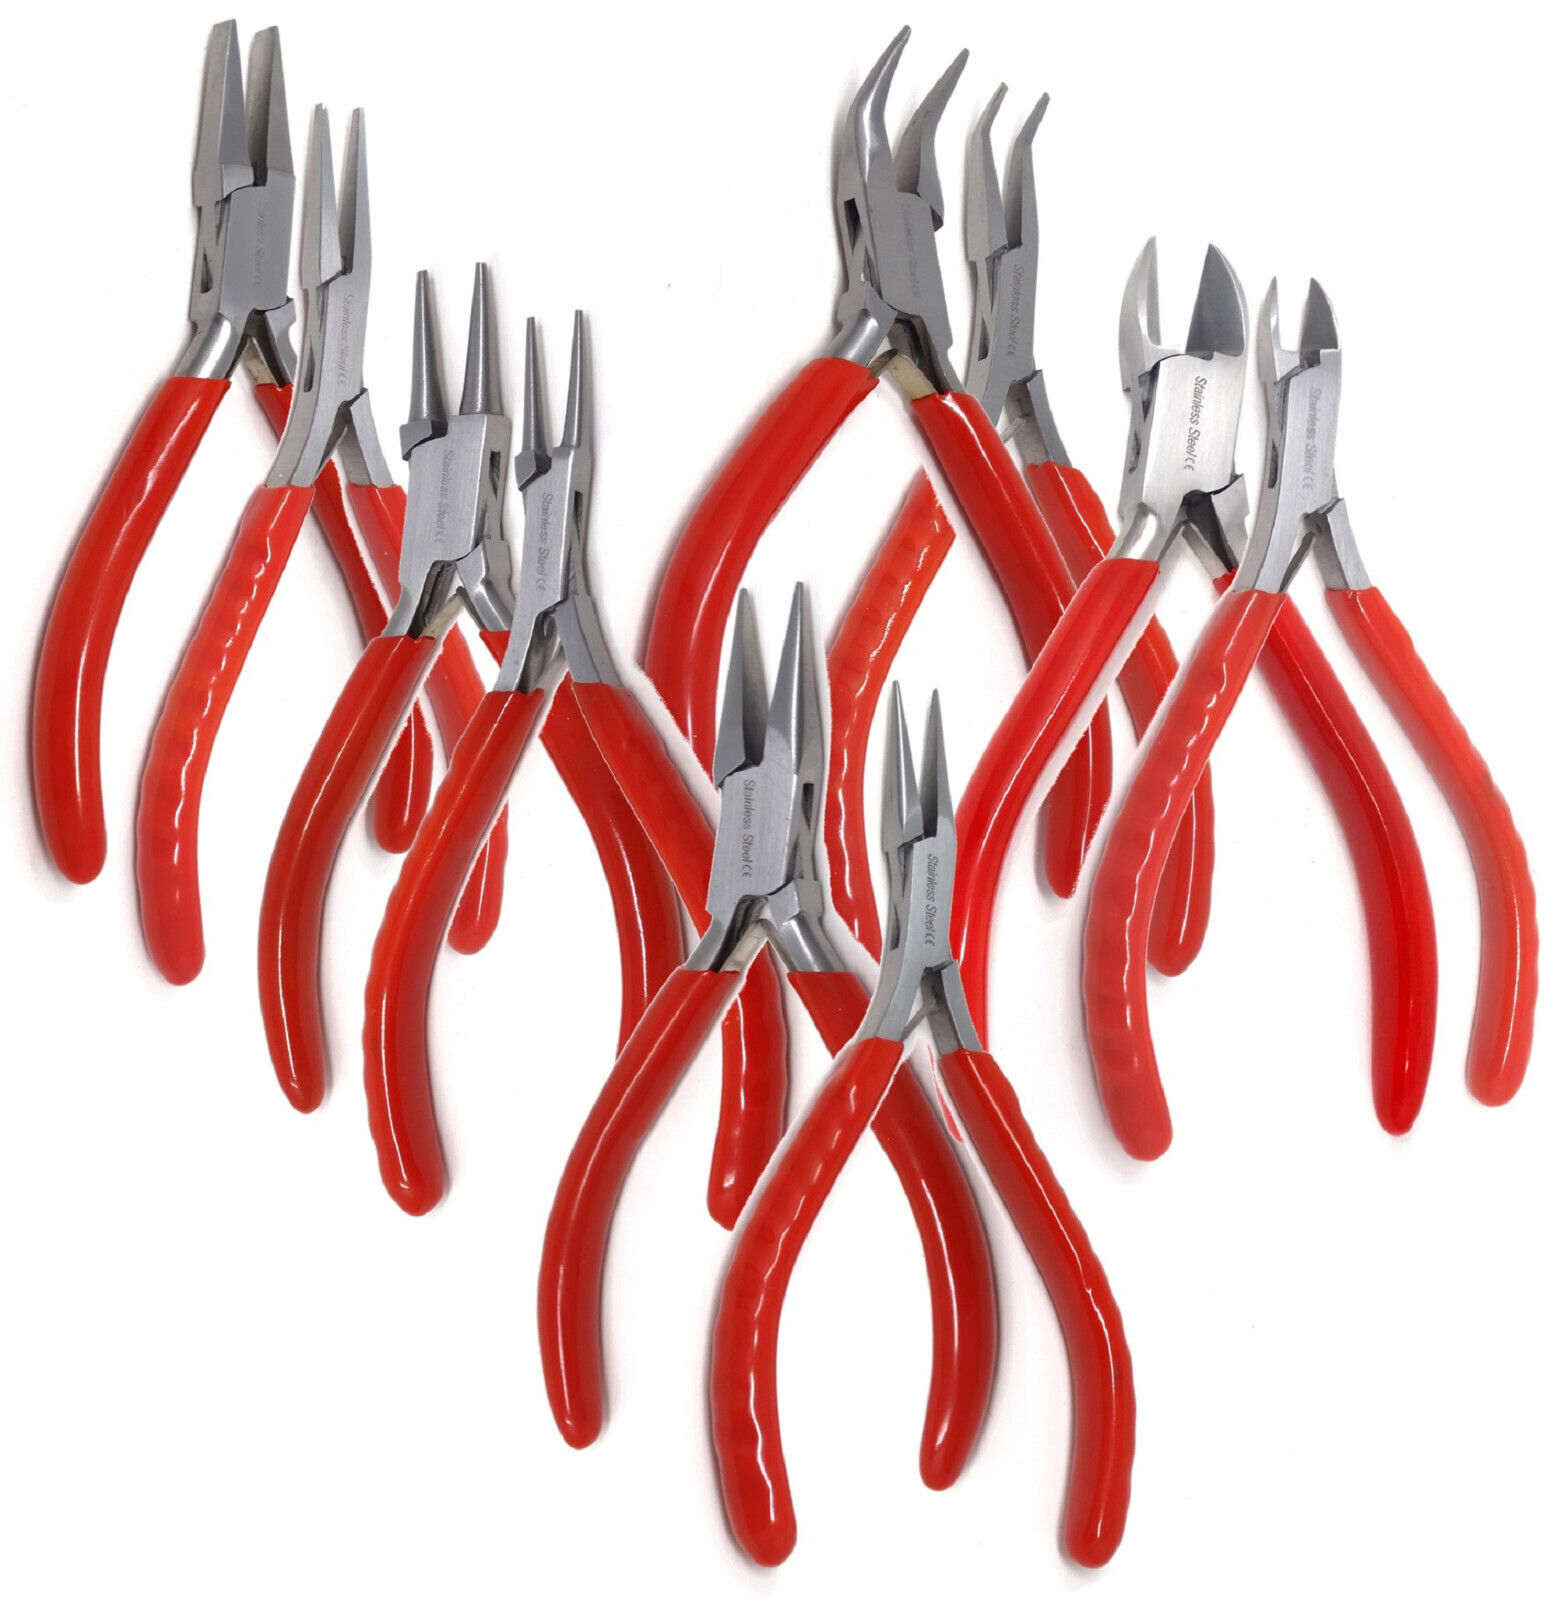 10pcs JEWELERS PLIERS SET JEWELRY MAKING BEADING WIRE WRAPPING HOBBY 5" PLIER US A2Z SCILAB Does Not Apply